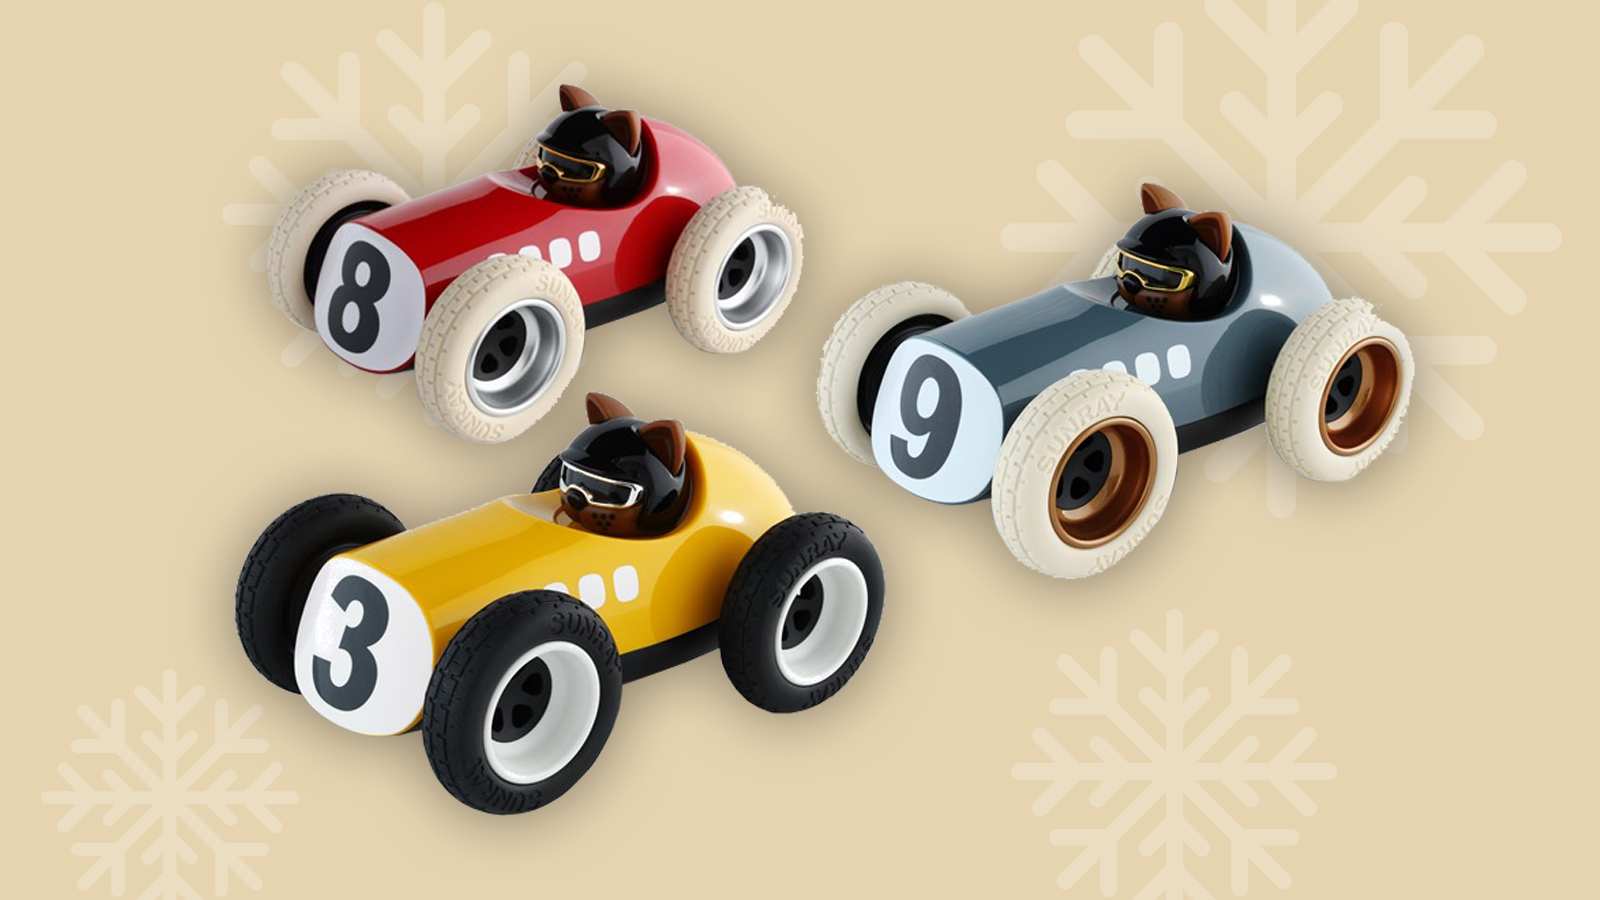 73 ideas for classic car Christmas gifts